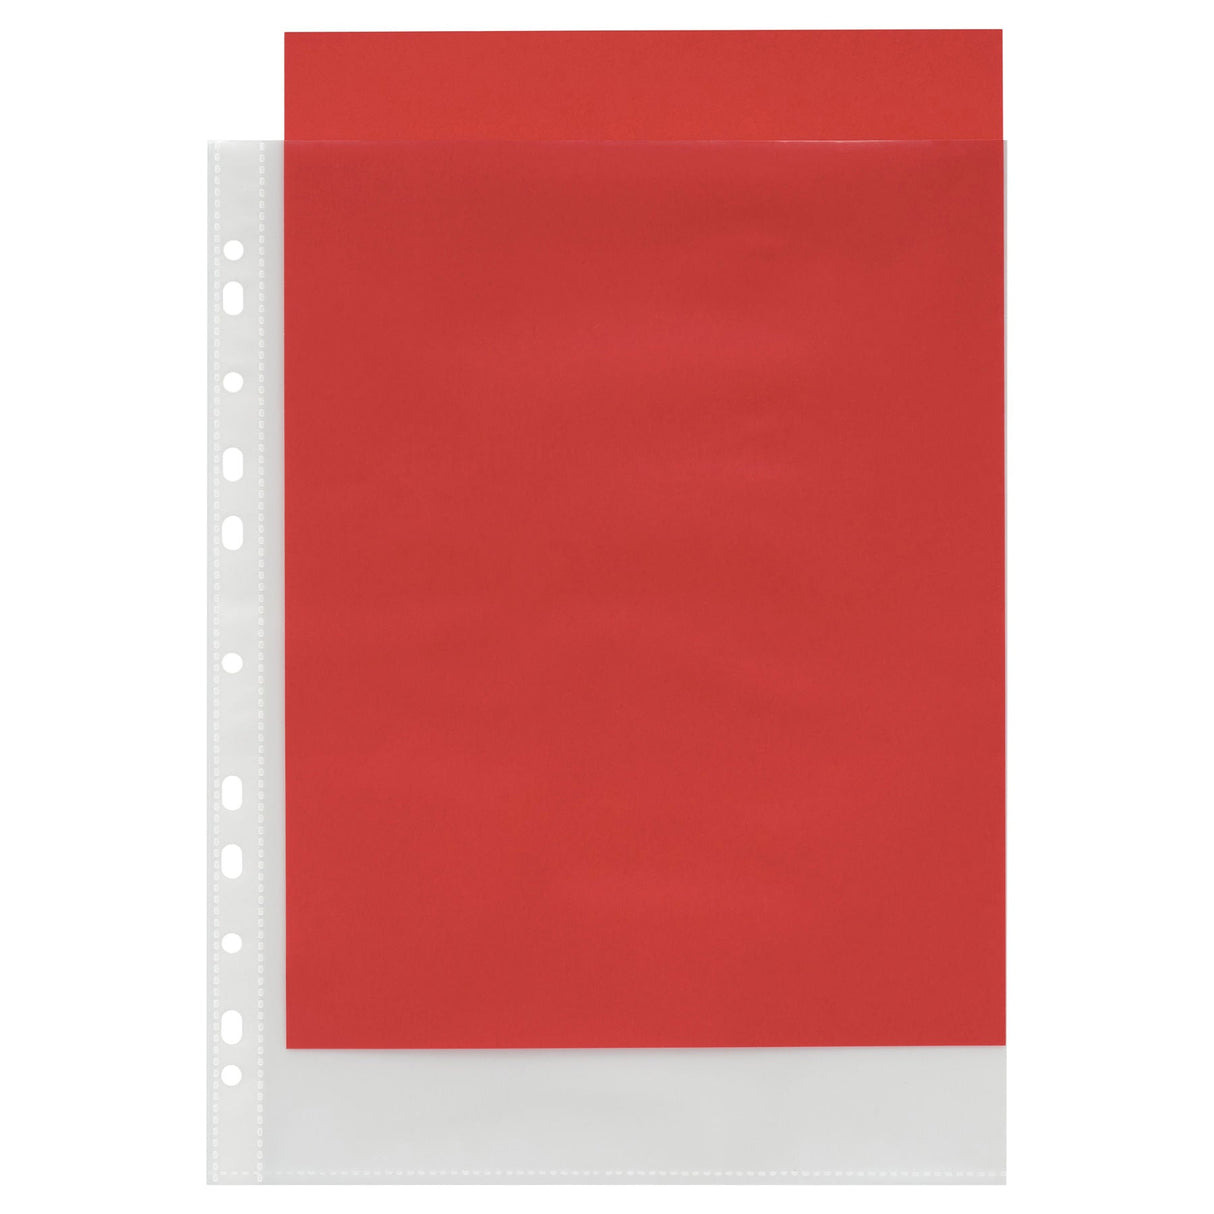 Premier Office A4 Protective Punched Pockets - Pack of 80 | Stationery Shop UK